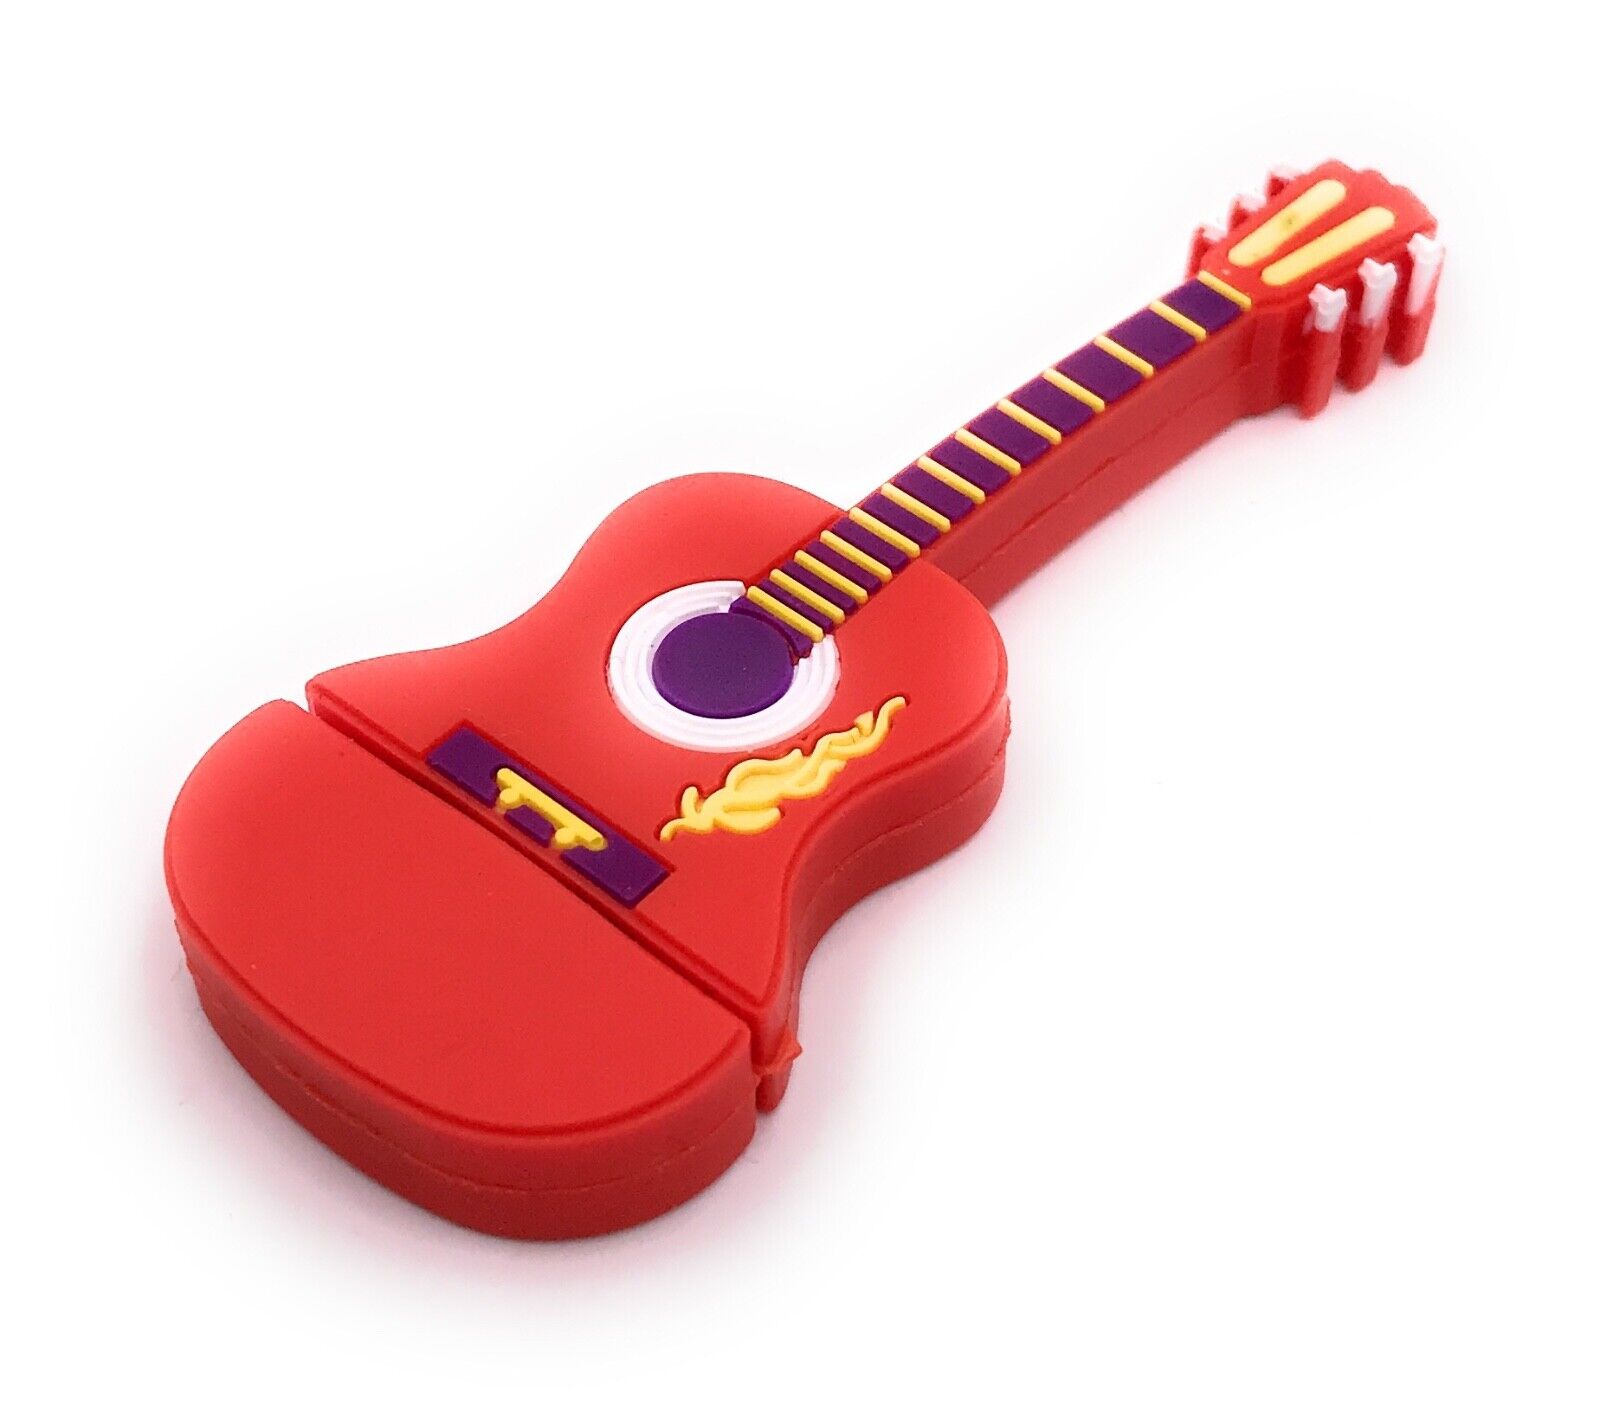 Guitar Musical Instrument Electric Guitar Red Funny USB Stick Div HD